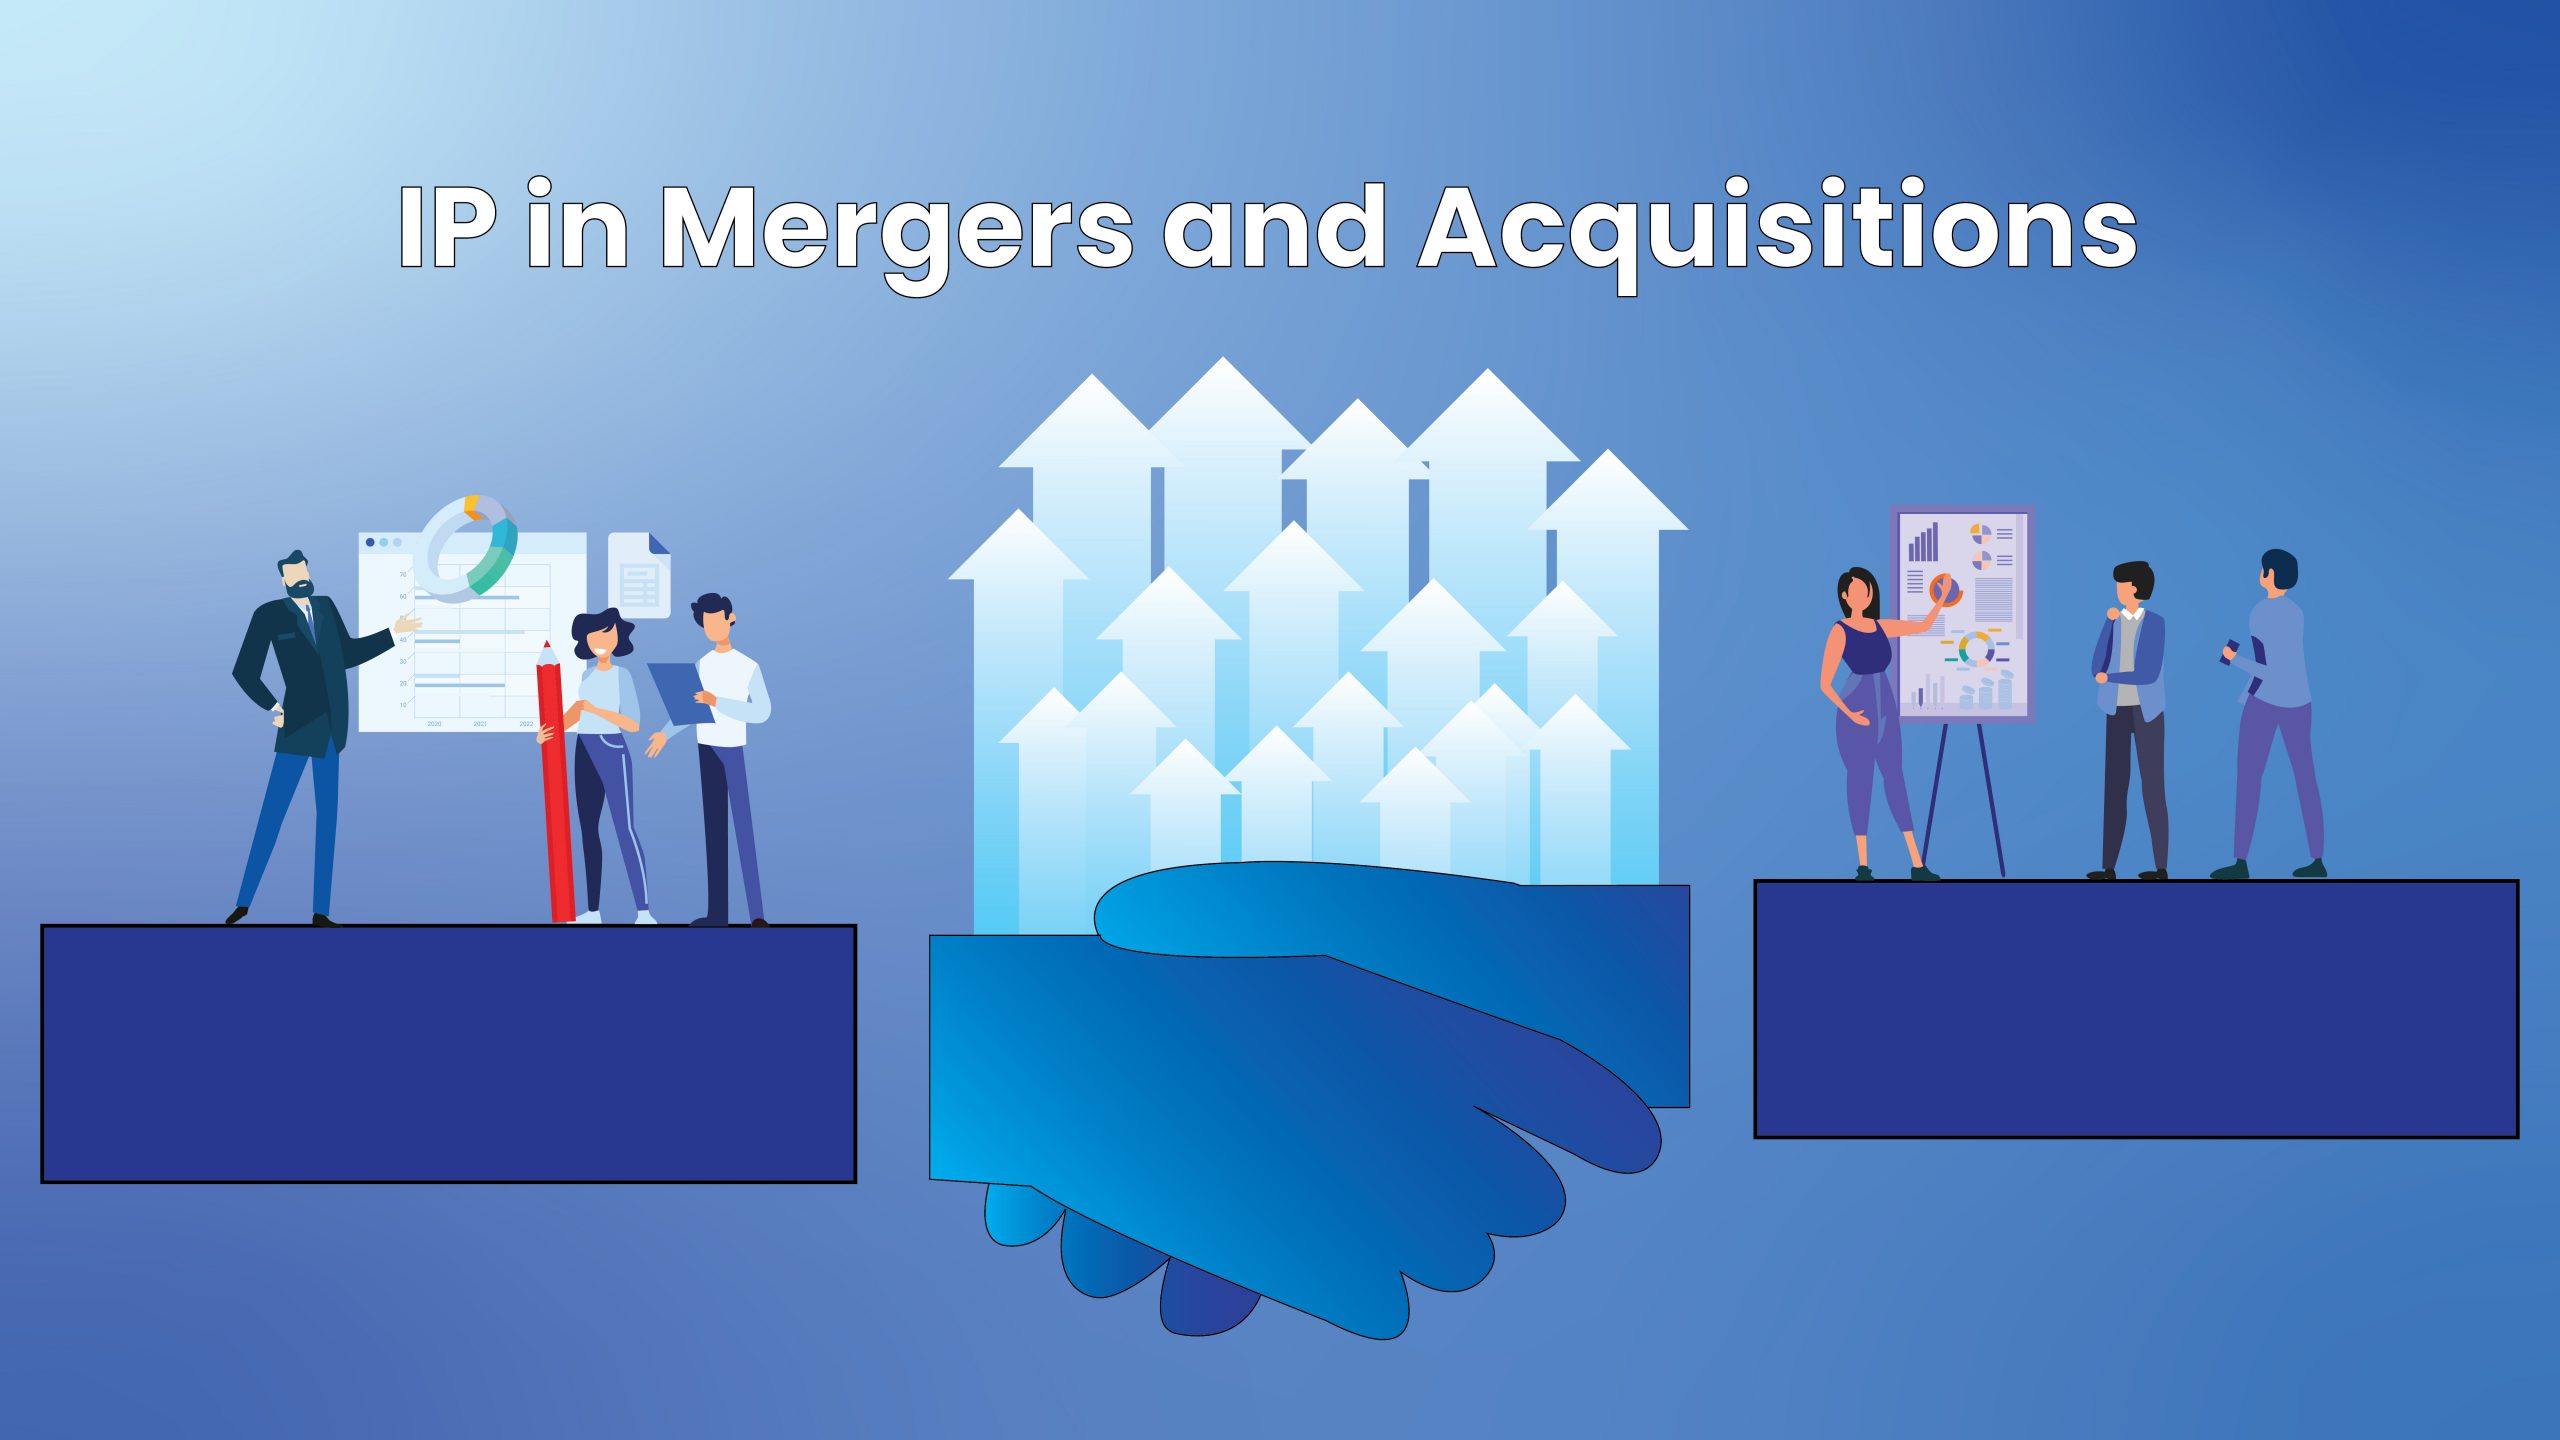 IPR and Mergers and Acquisitions